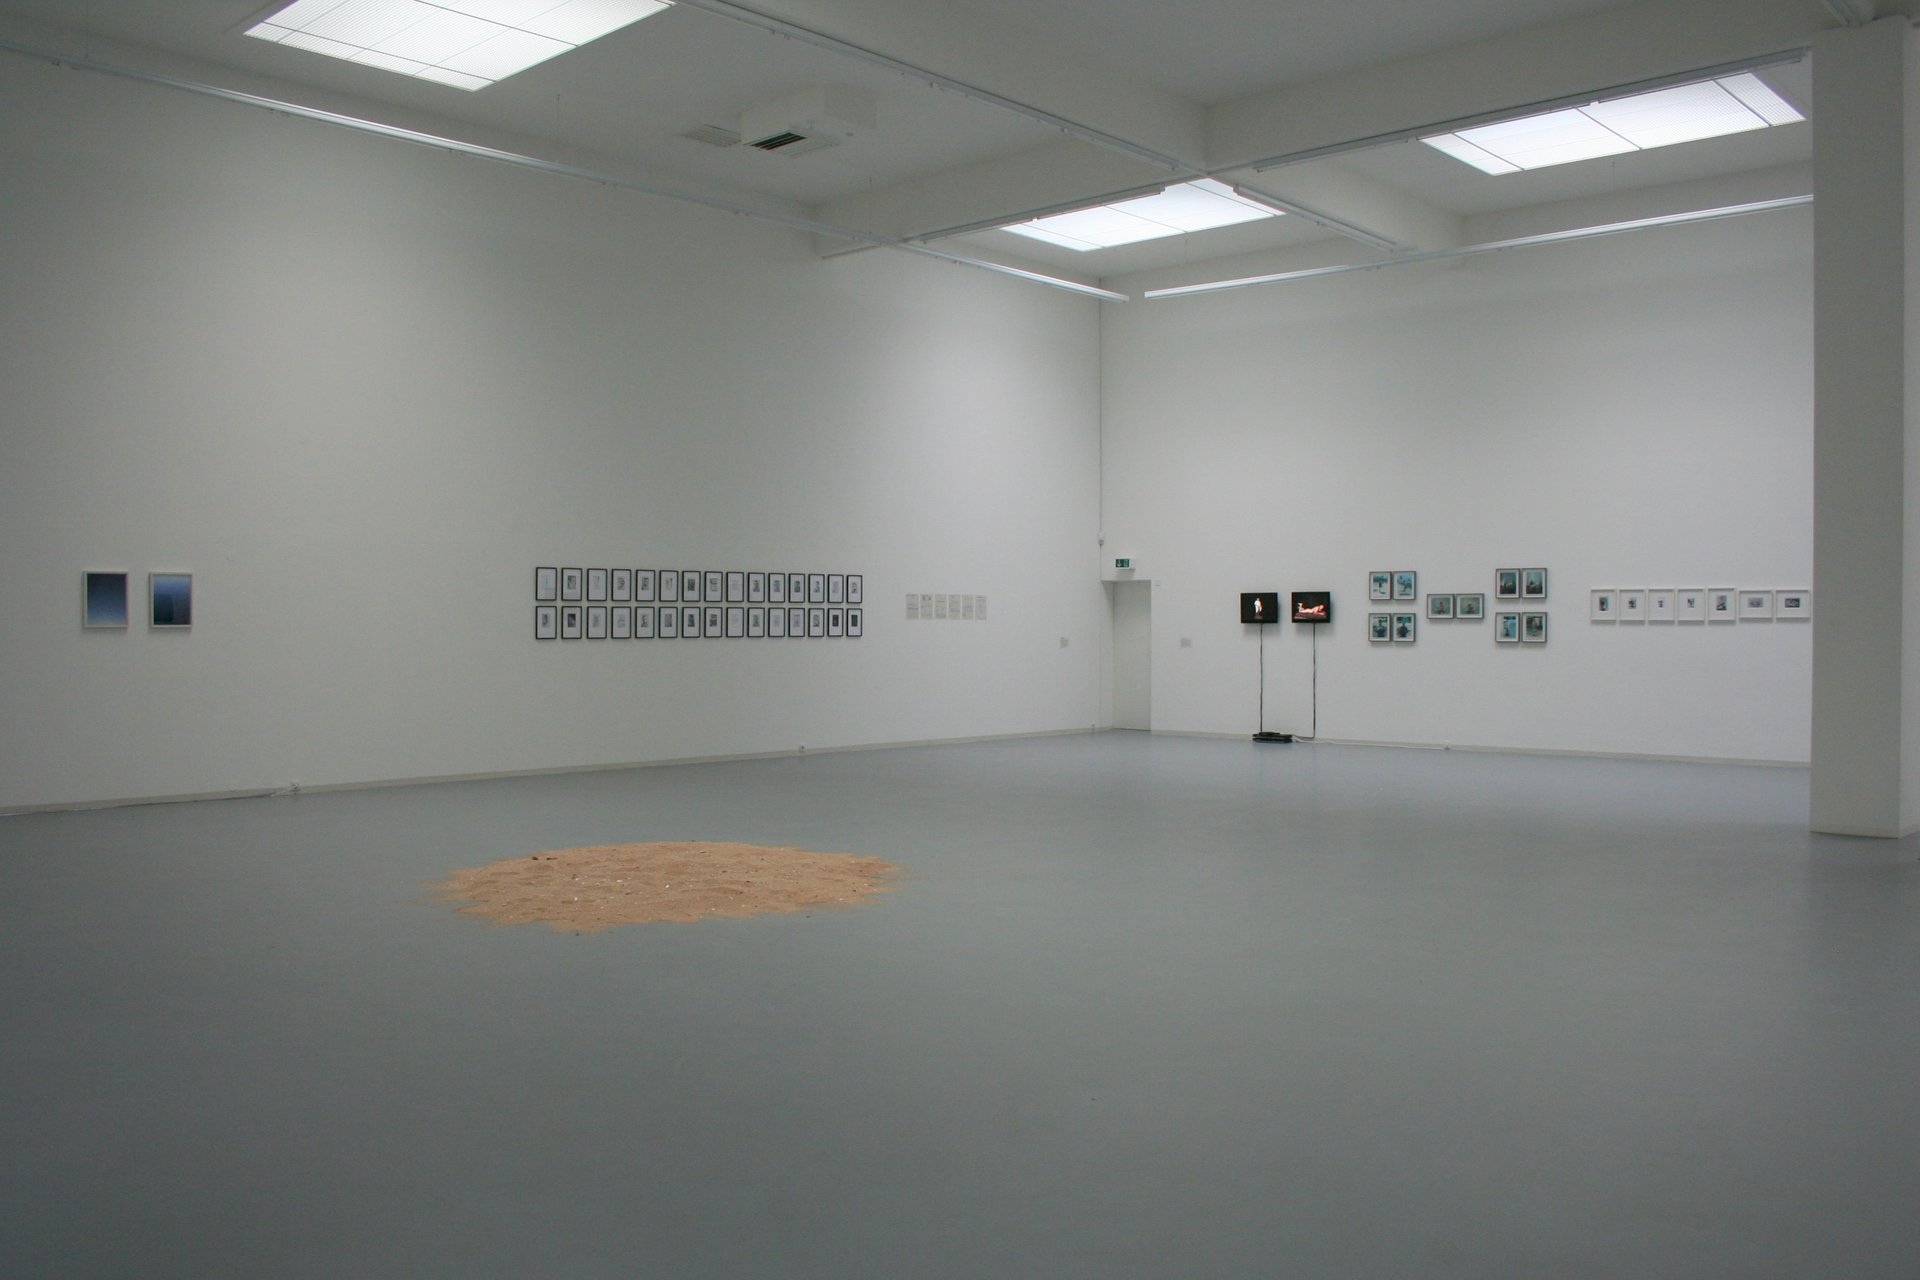 Indicated by signs, Installation view, Bonner Kunstverein, 2009. Photo: n.a.